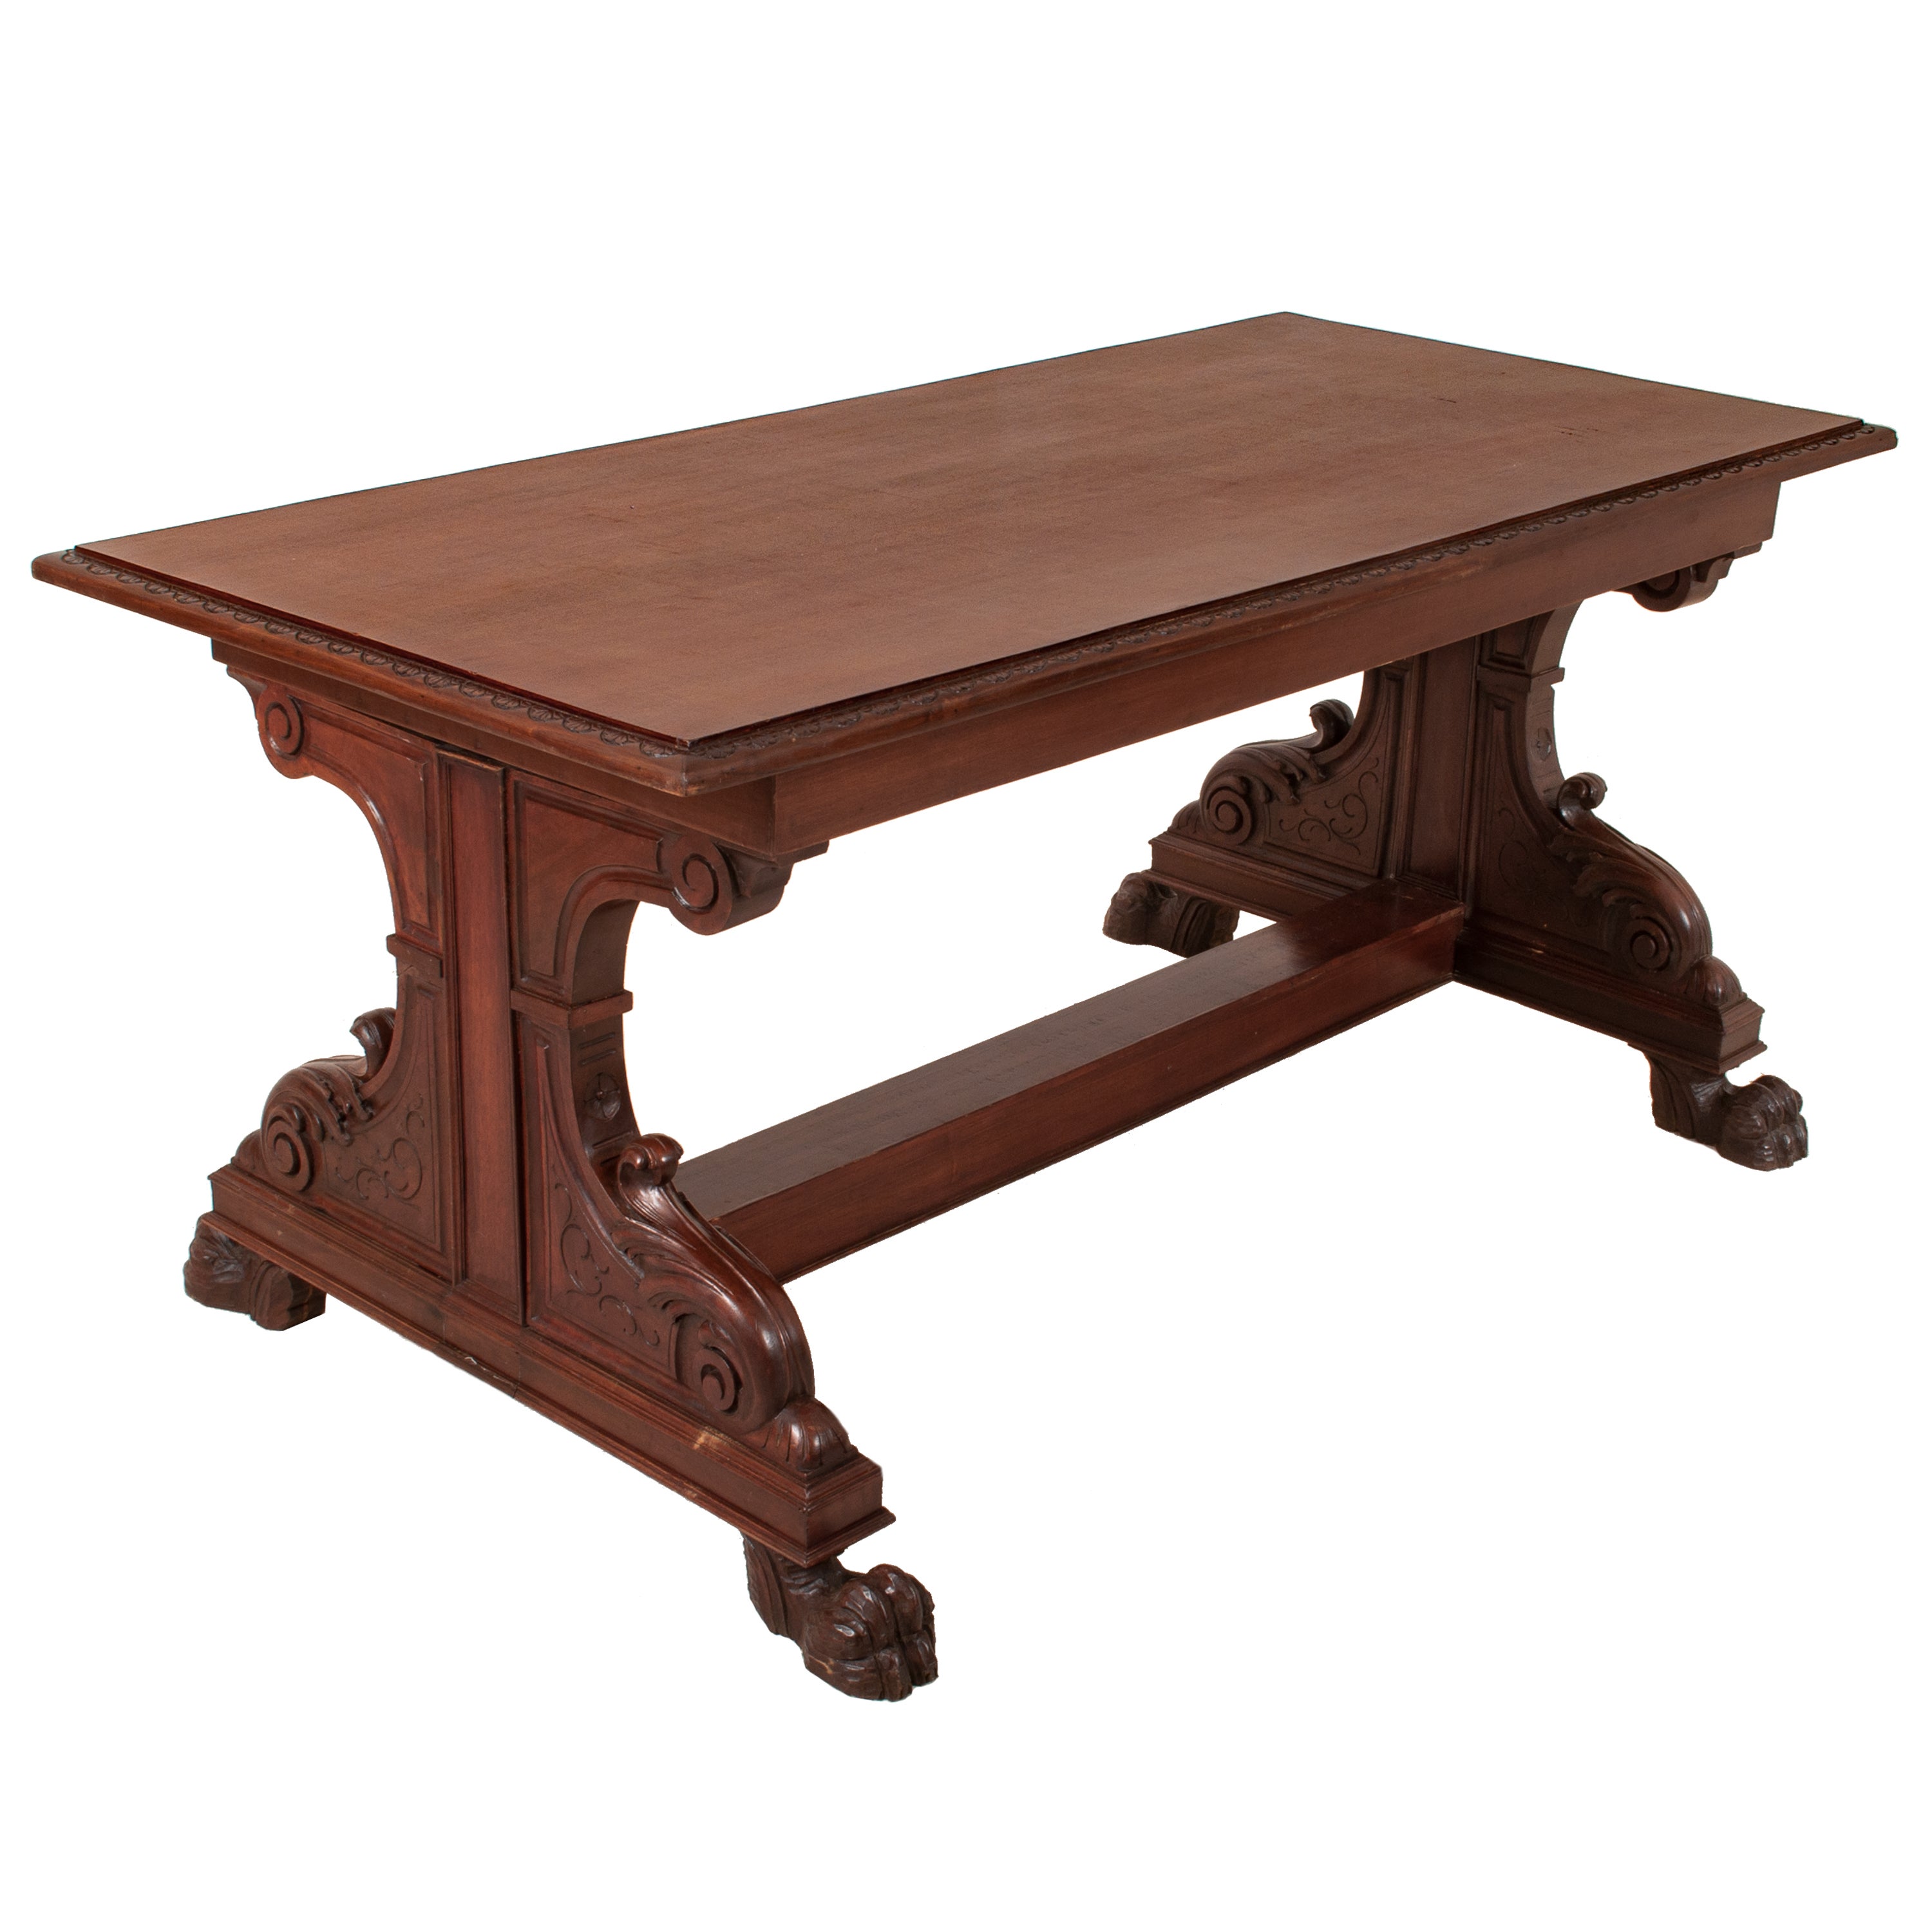 Antique Italian Carved Walnut Renaissance Revival Library Serving Table, 1870 For Sale